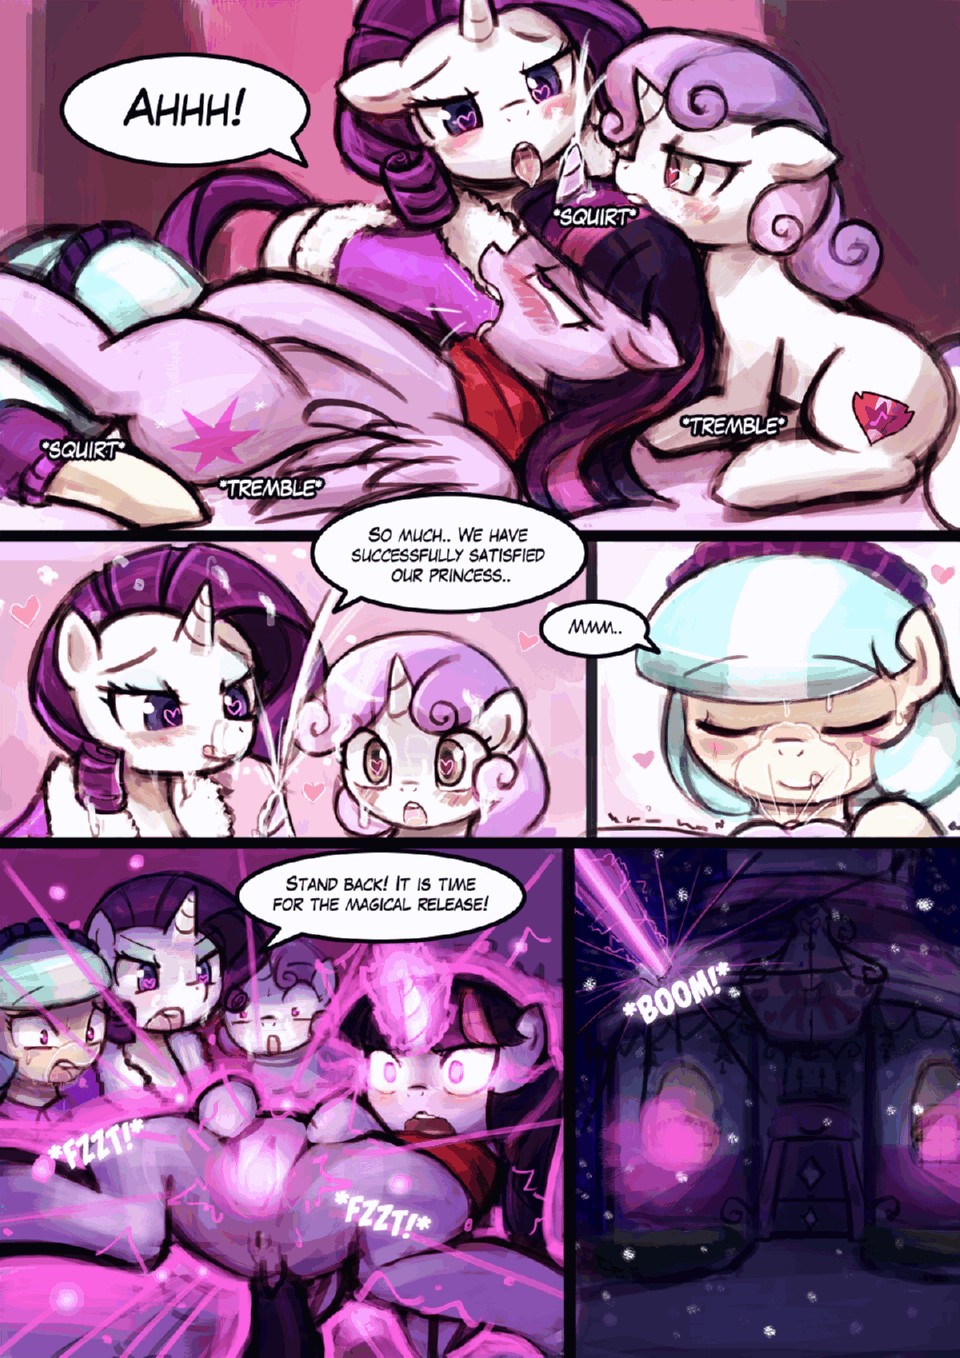 Hot Cocoa with Marshmallows porn comic page 010